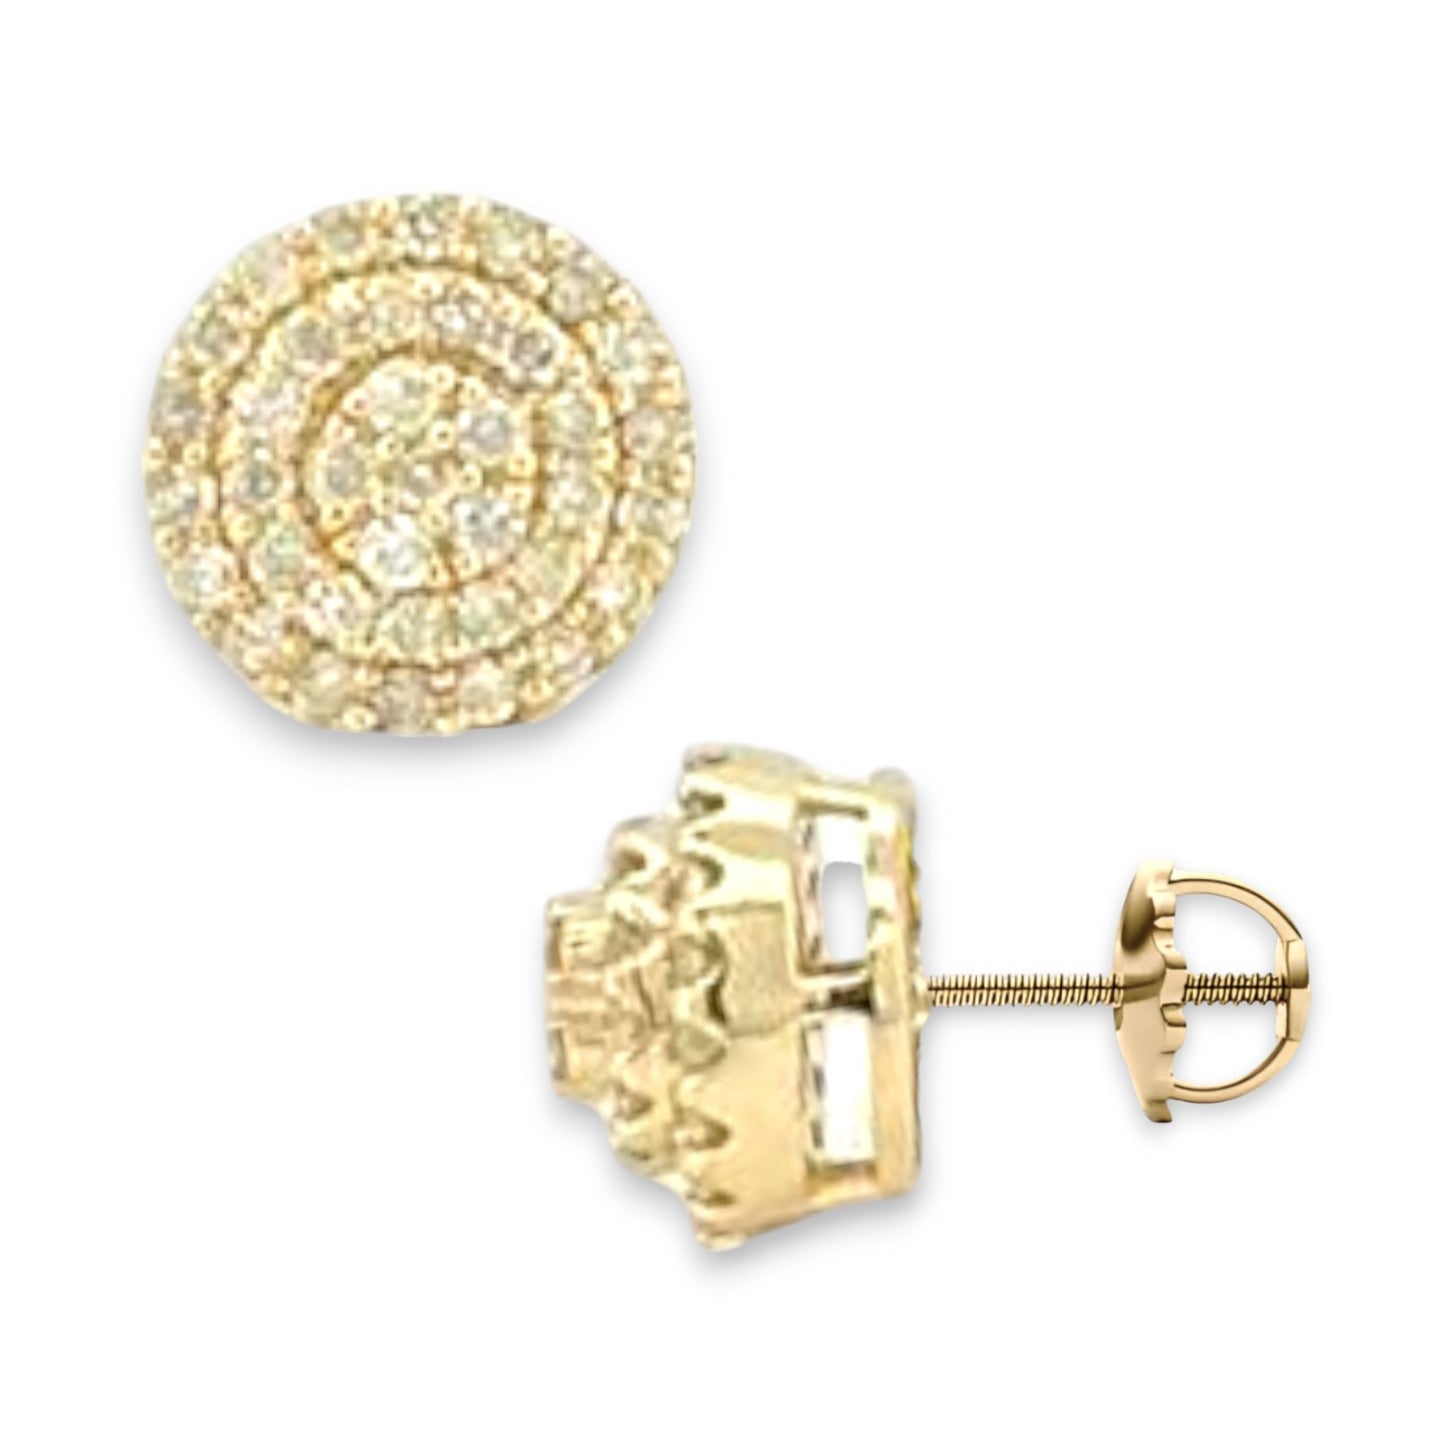 0.75ct Diamond Halo Cluster Square Stud Earrings - 14k Yellow Gold